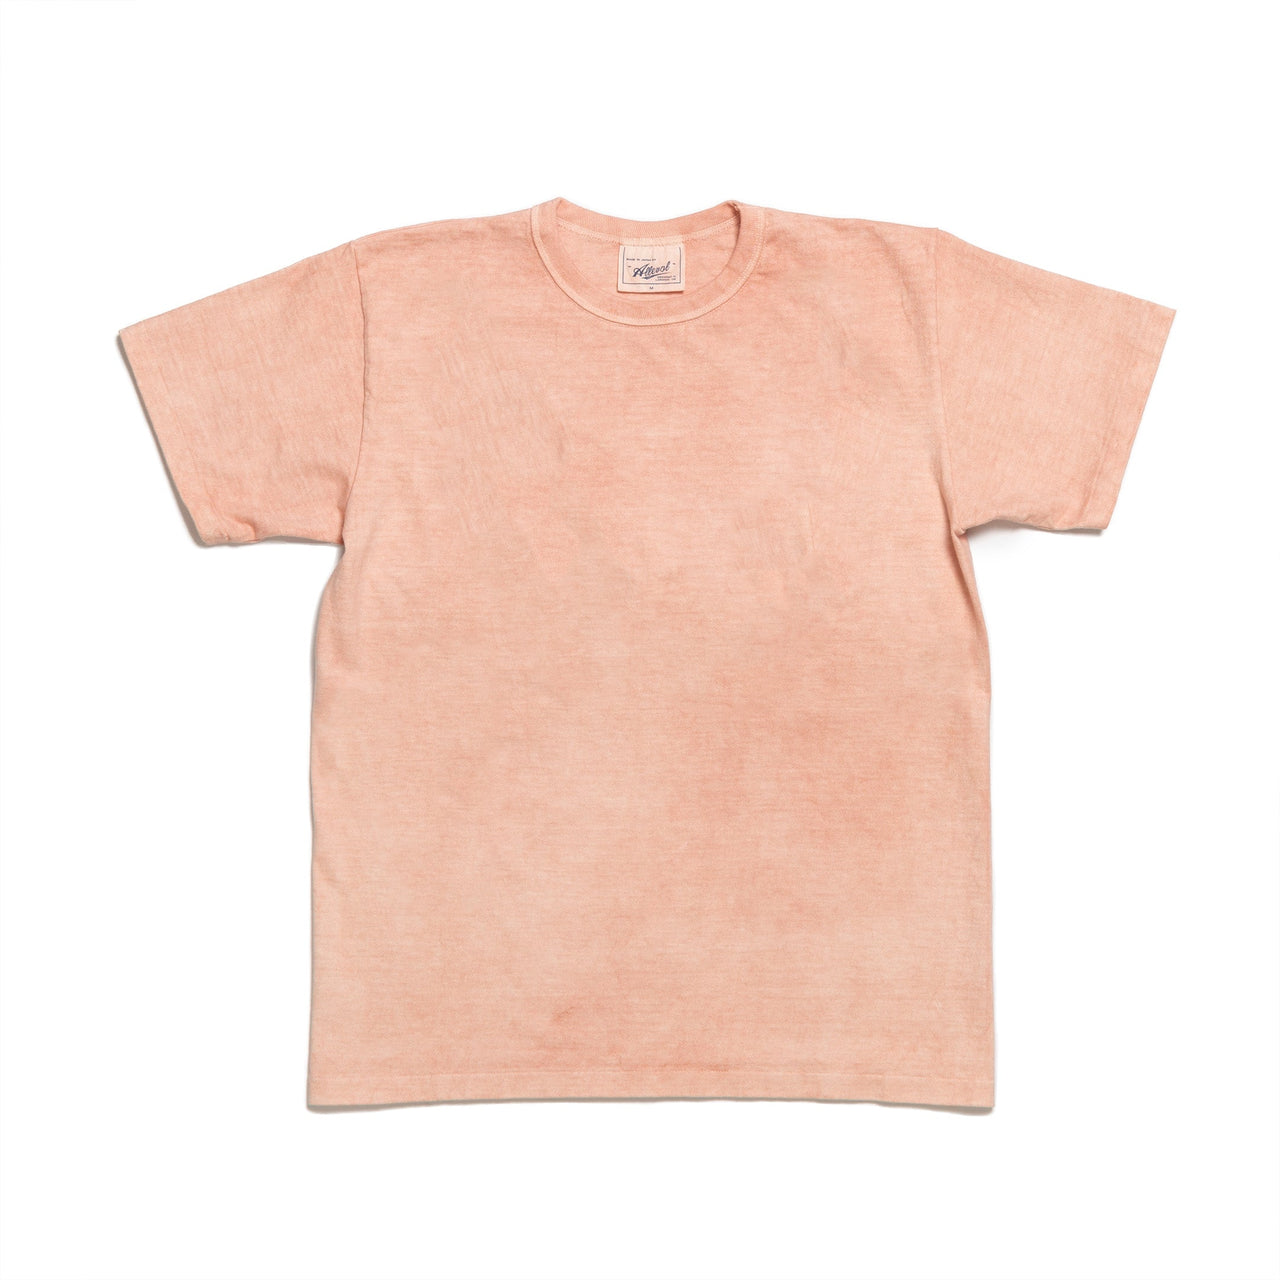 Allevol Heavy Duty Crew Neck T-shirt Hand Dyed Pink-T-Shirt-Clutch Cafe